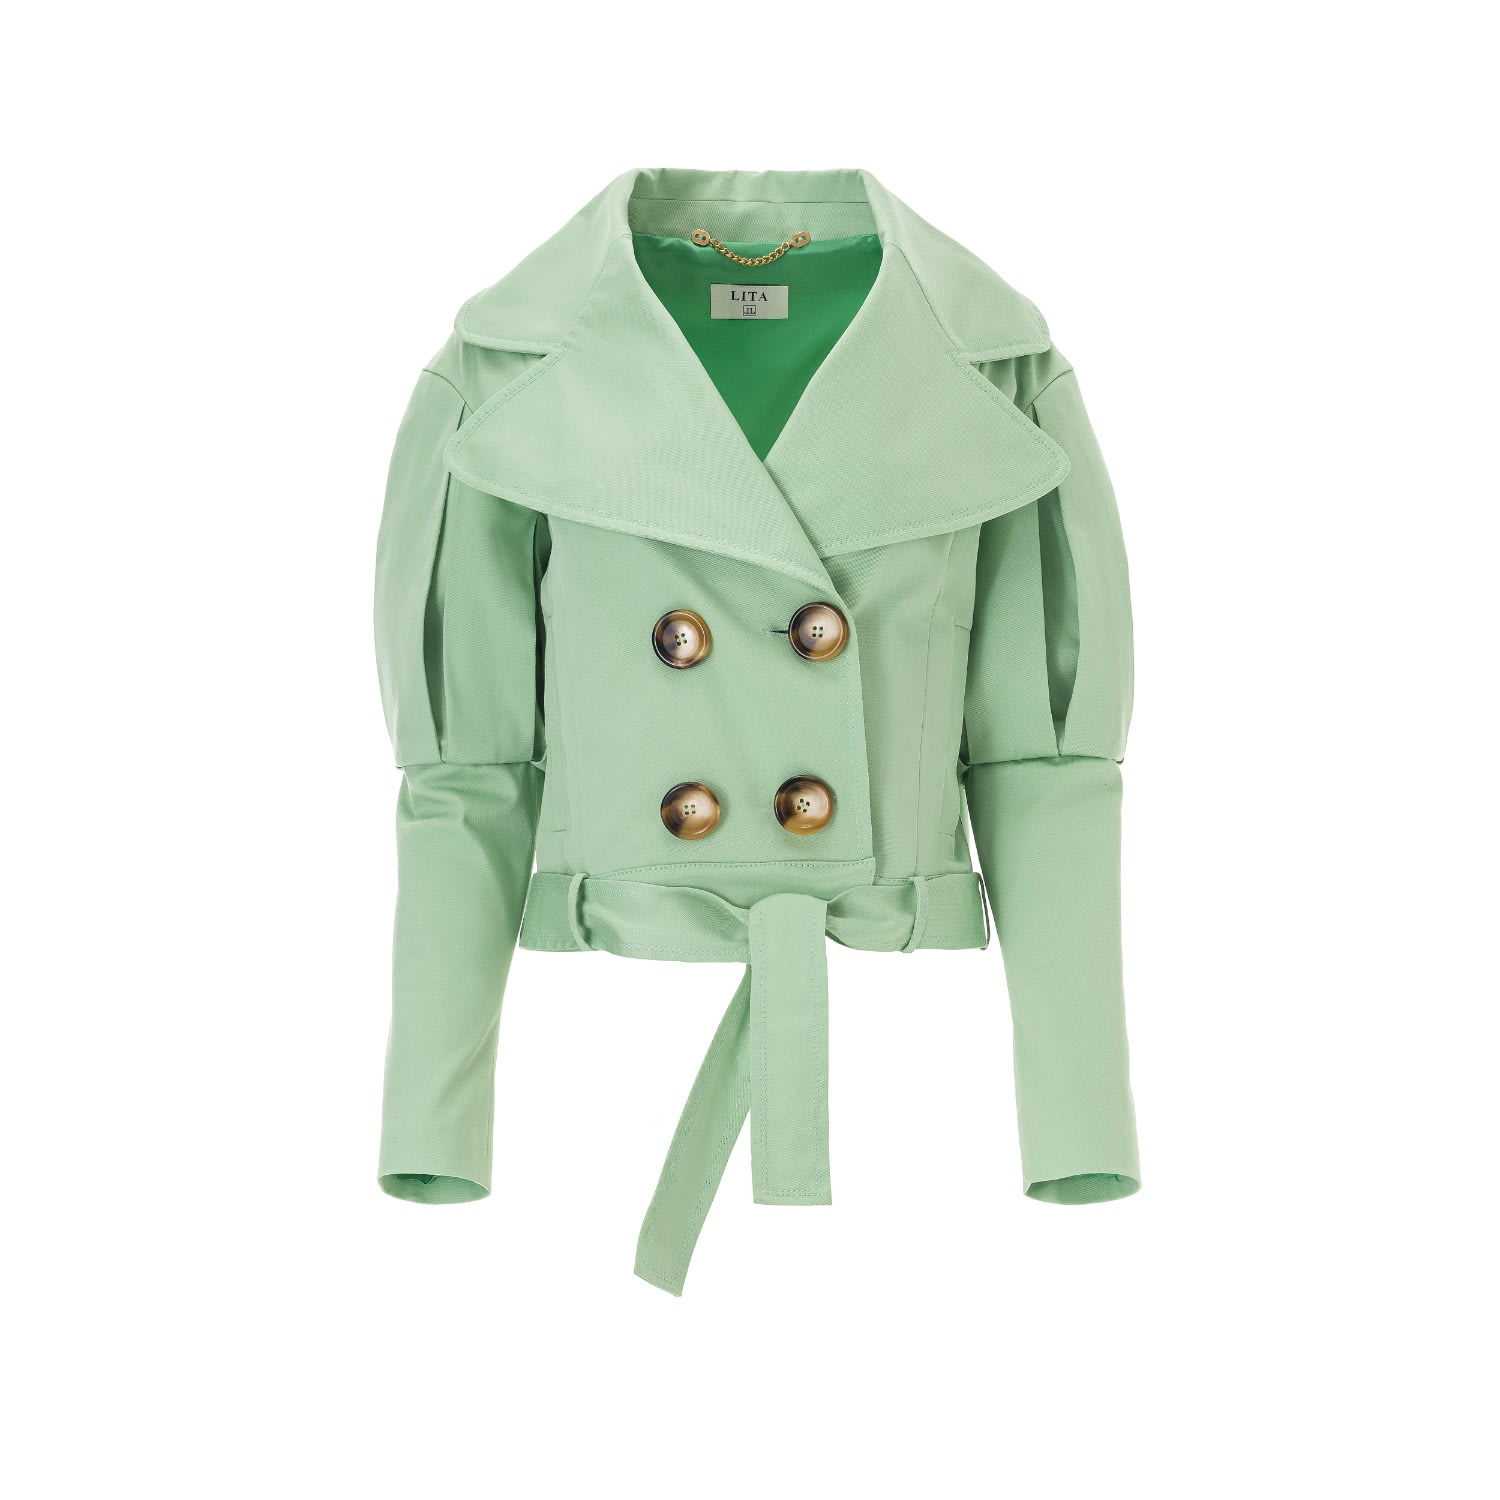 Lita Couture Women's Statement Jacket With Oversized Lapels In Green